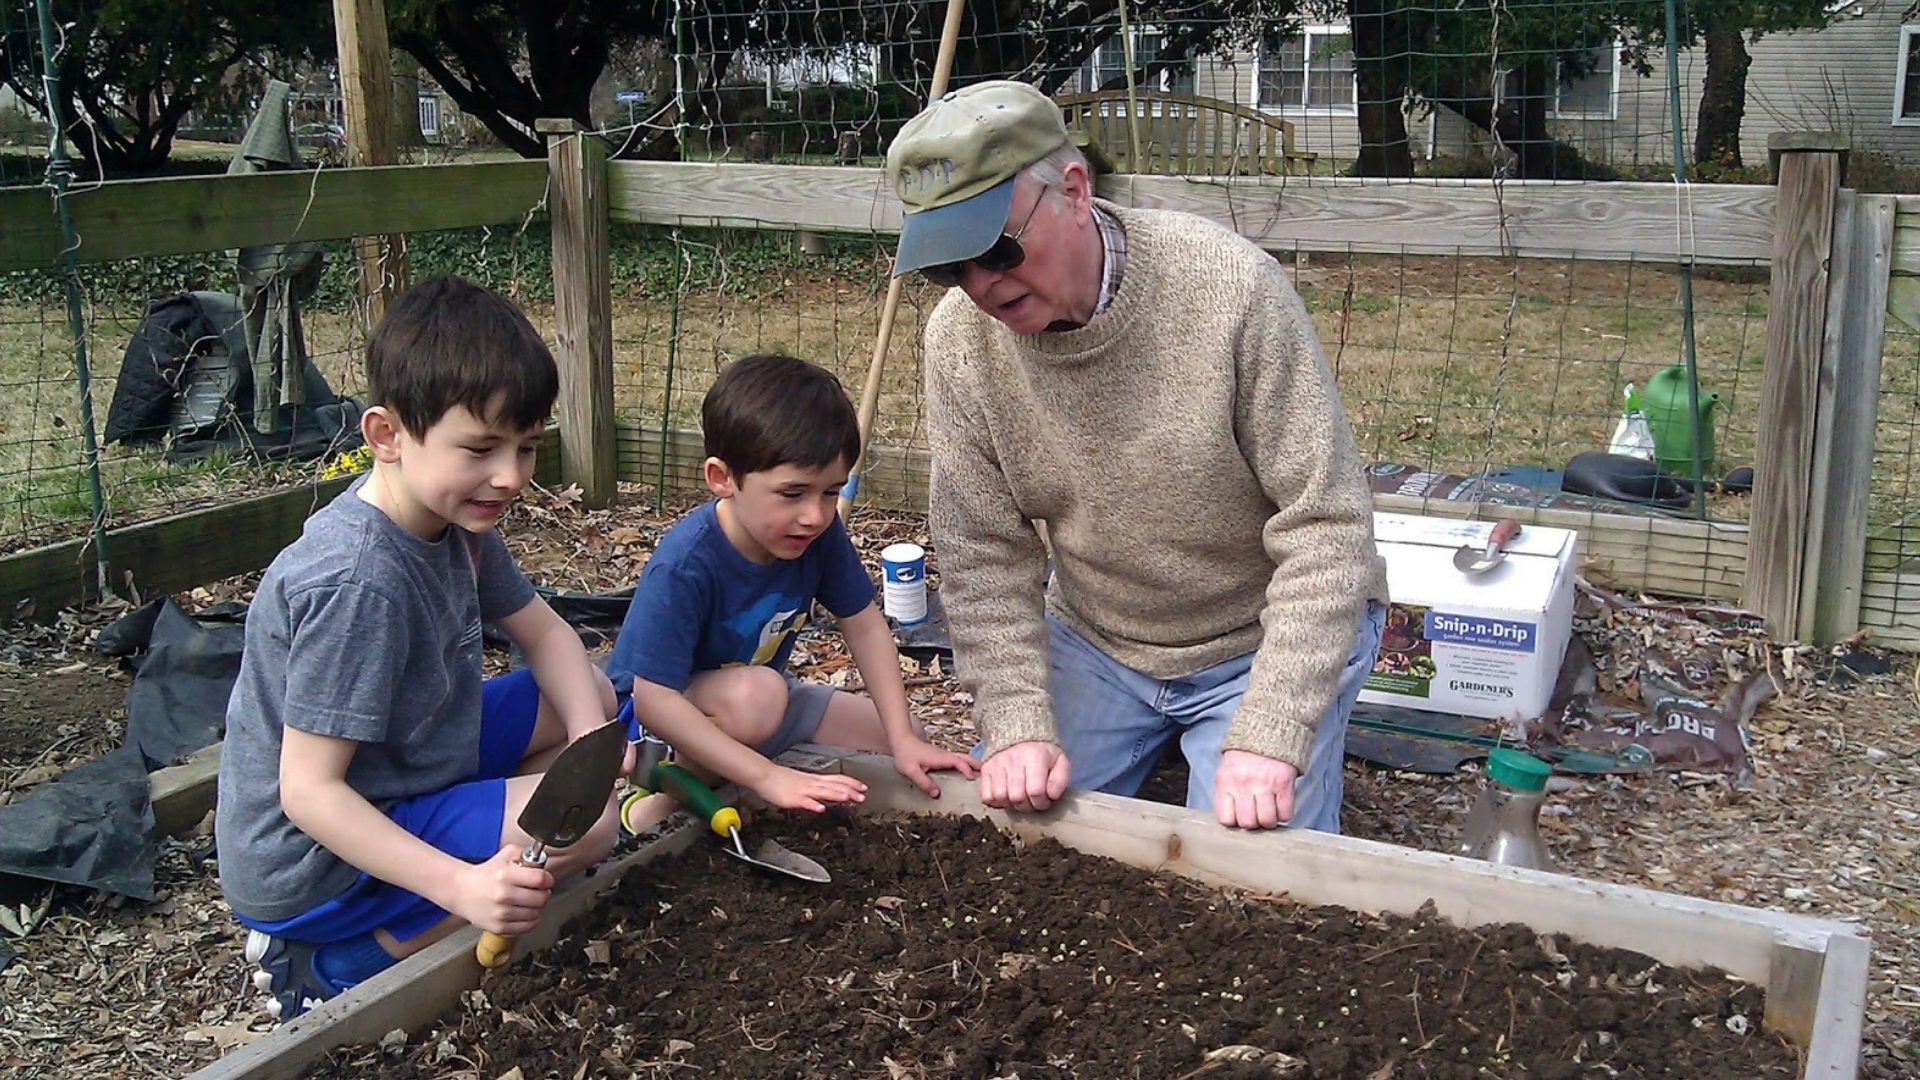 older man and two young boys working together in a garden